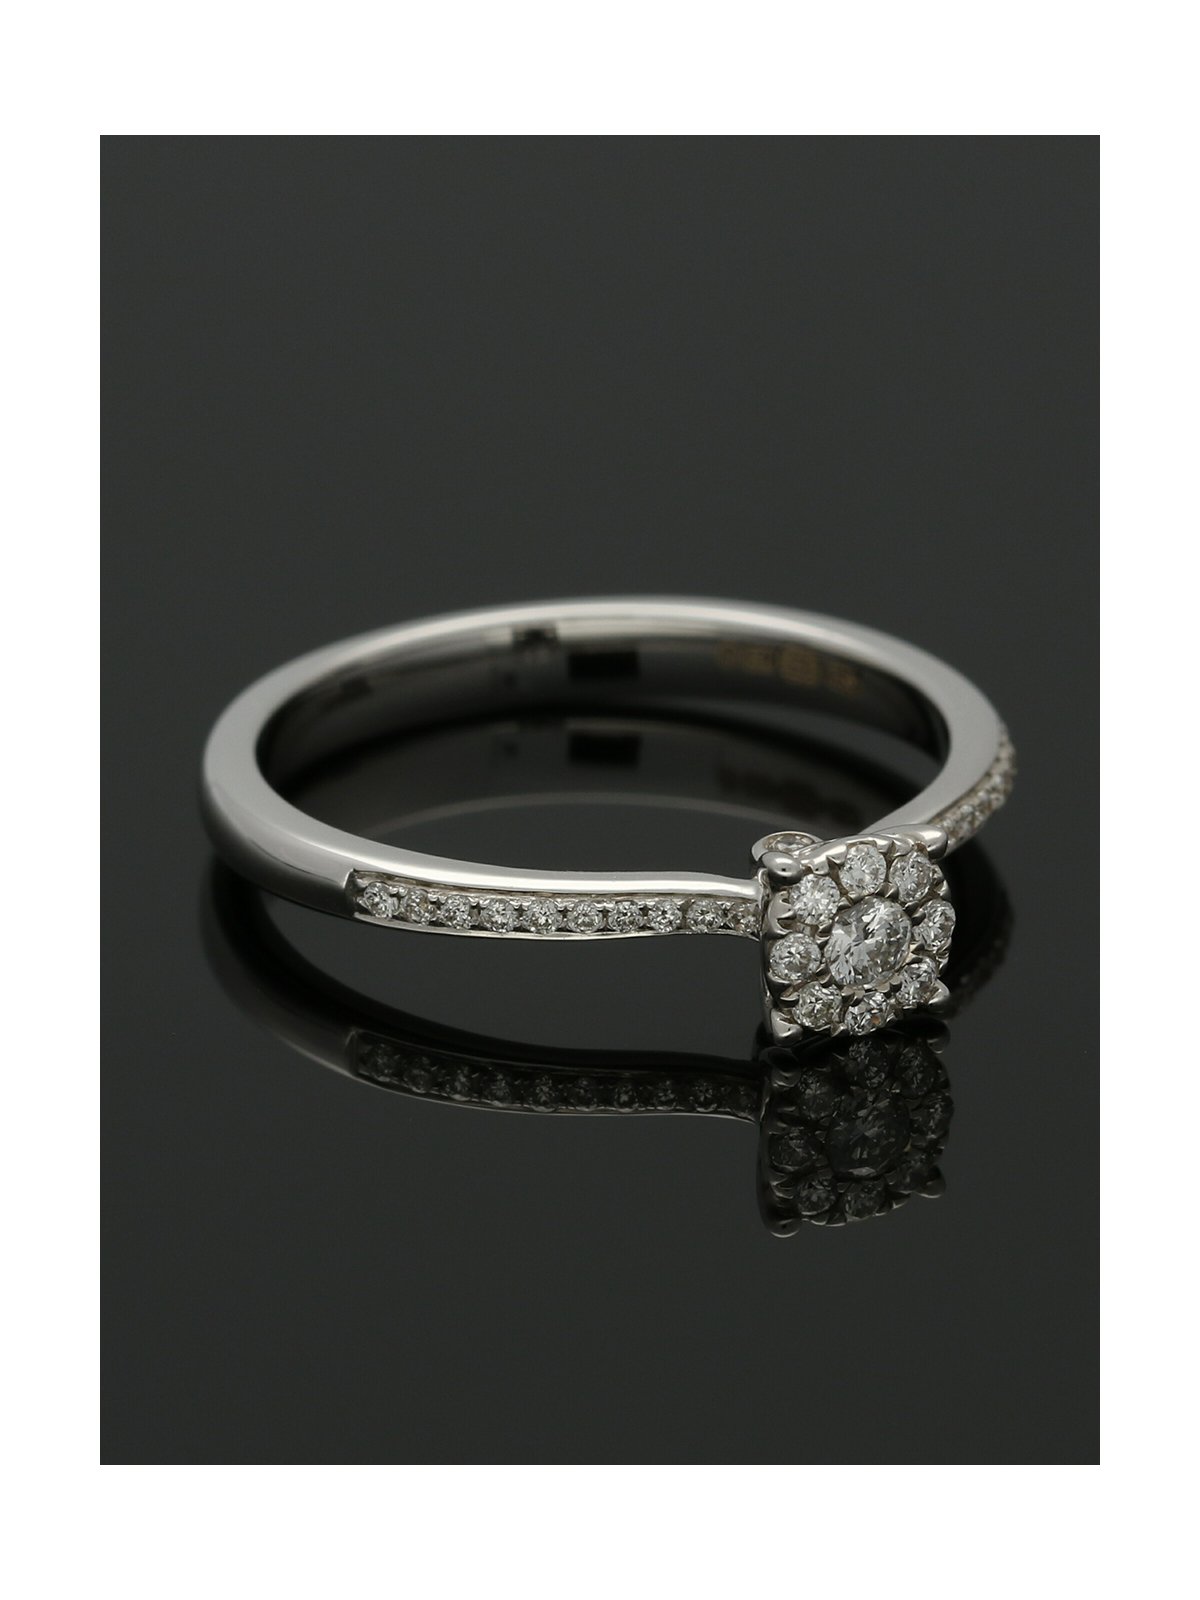 Diamond Cluster Ring 0.18ct Round Brilliant Cut in 18ct White Gold with Diamond Shoulders